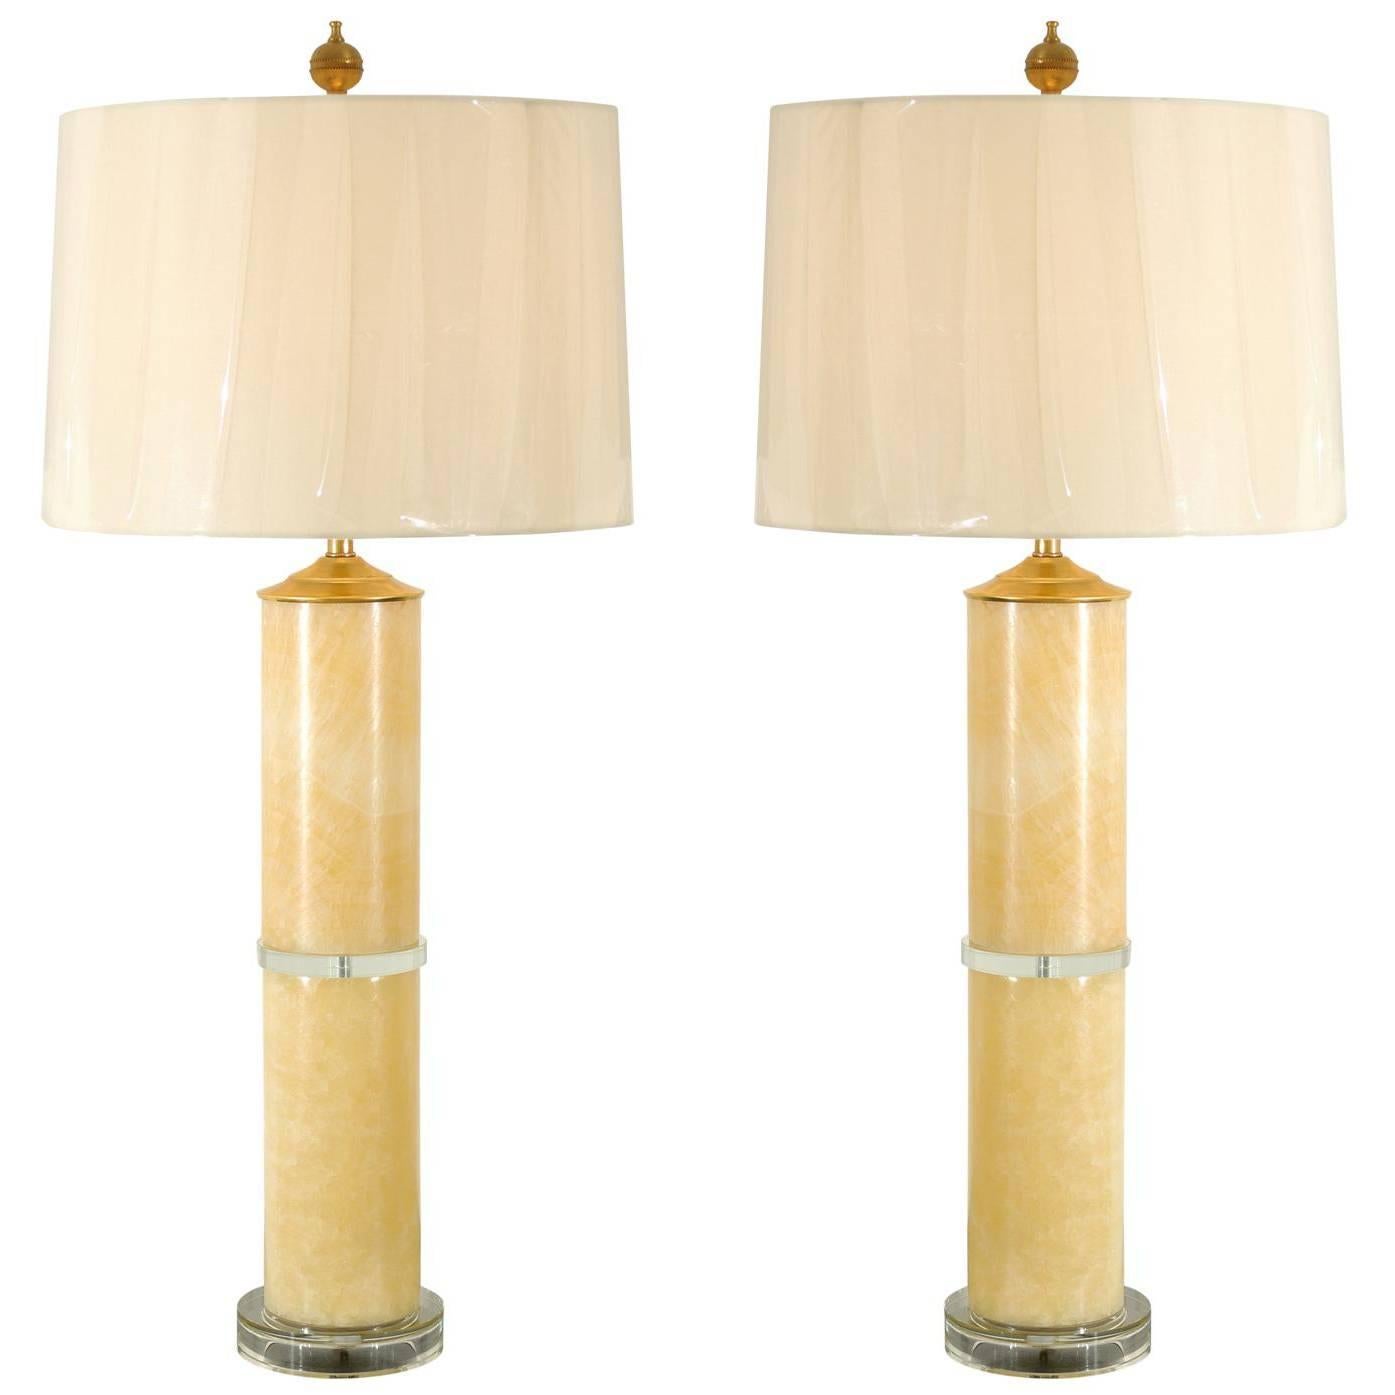 Pair of Large-Scale Marble Cylinder Lamps with Brass and Glass Accents